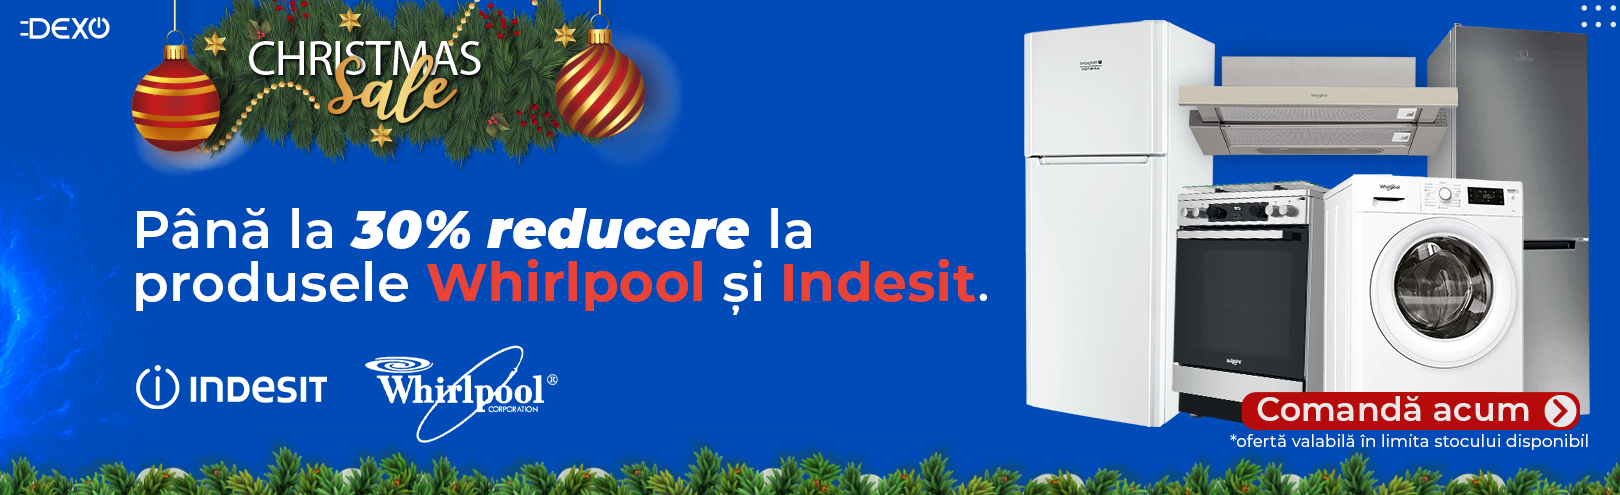 Whp si indesit